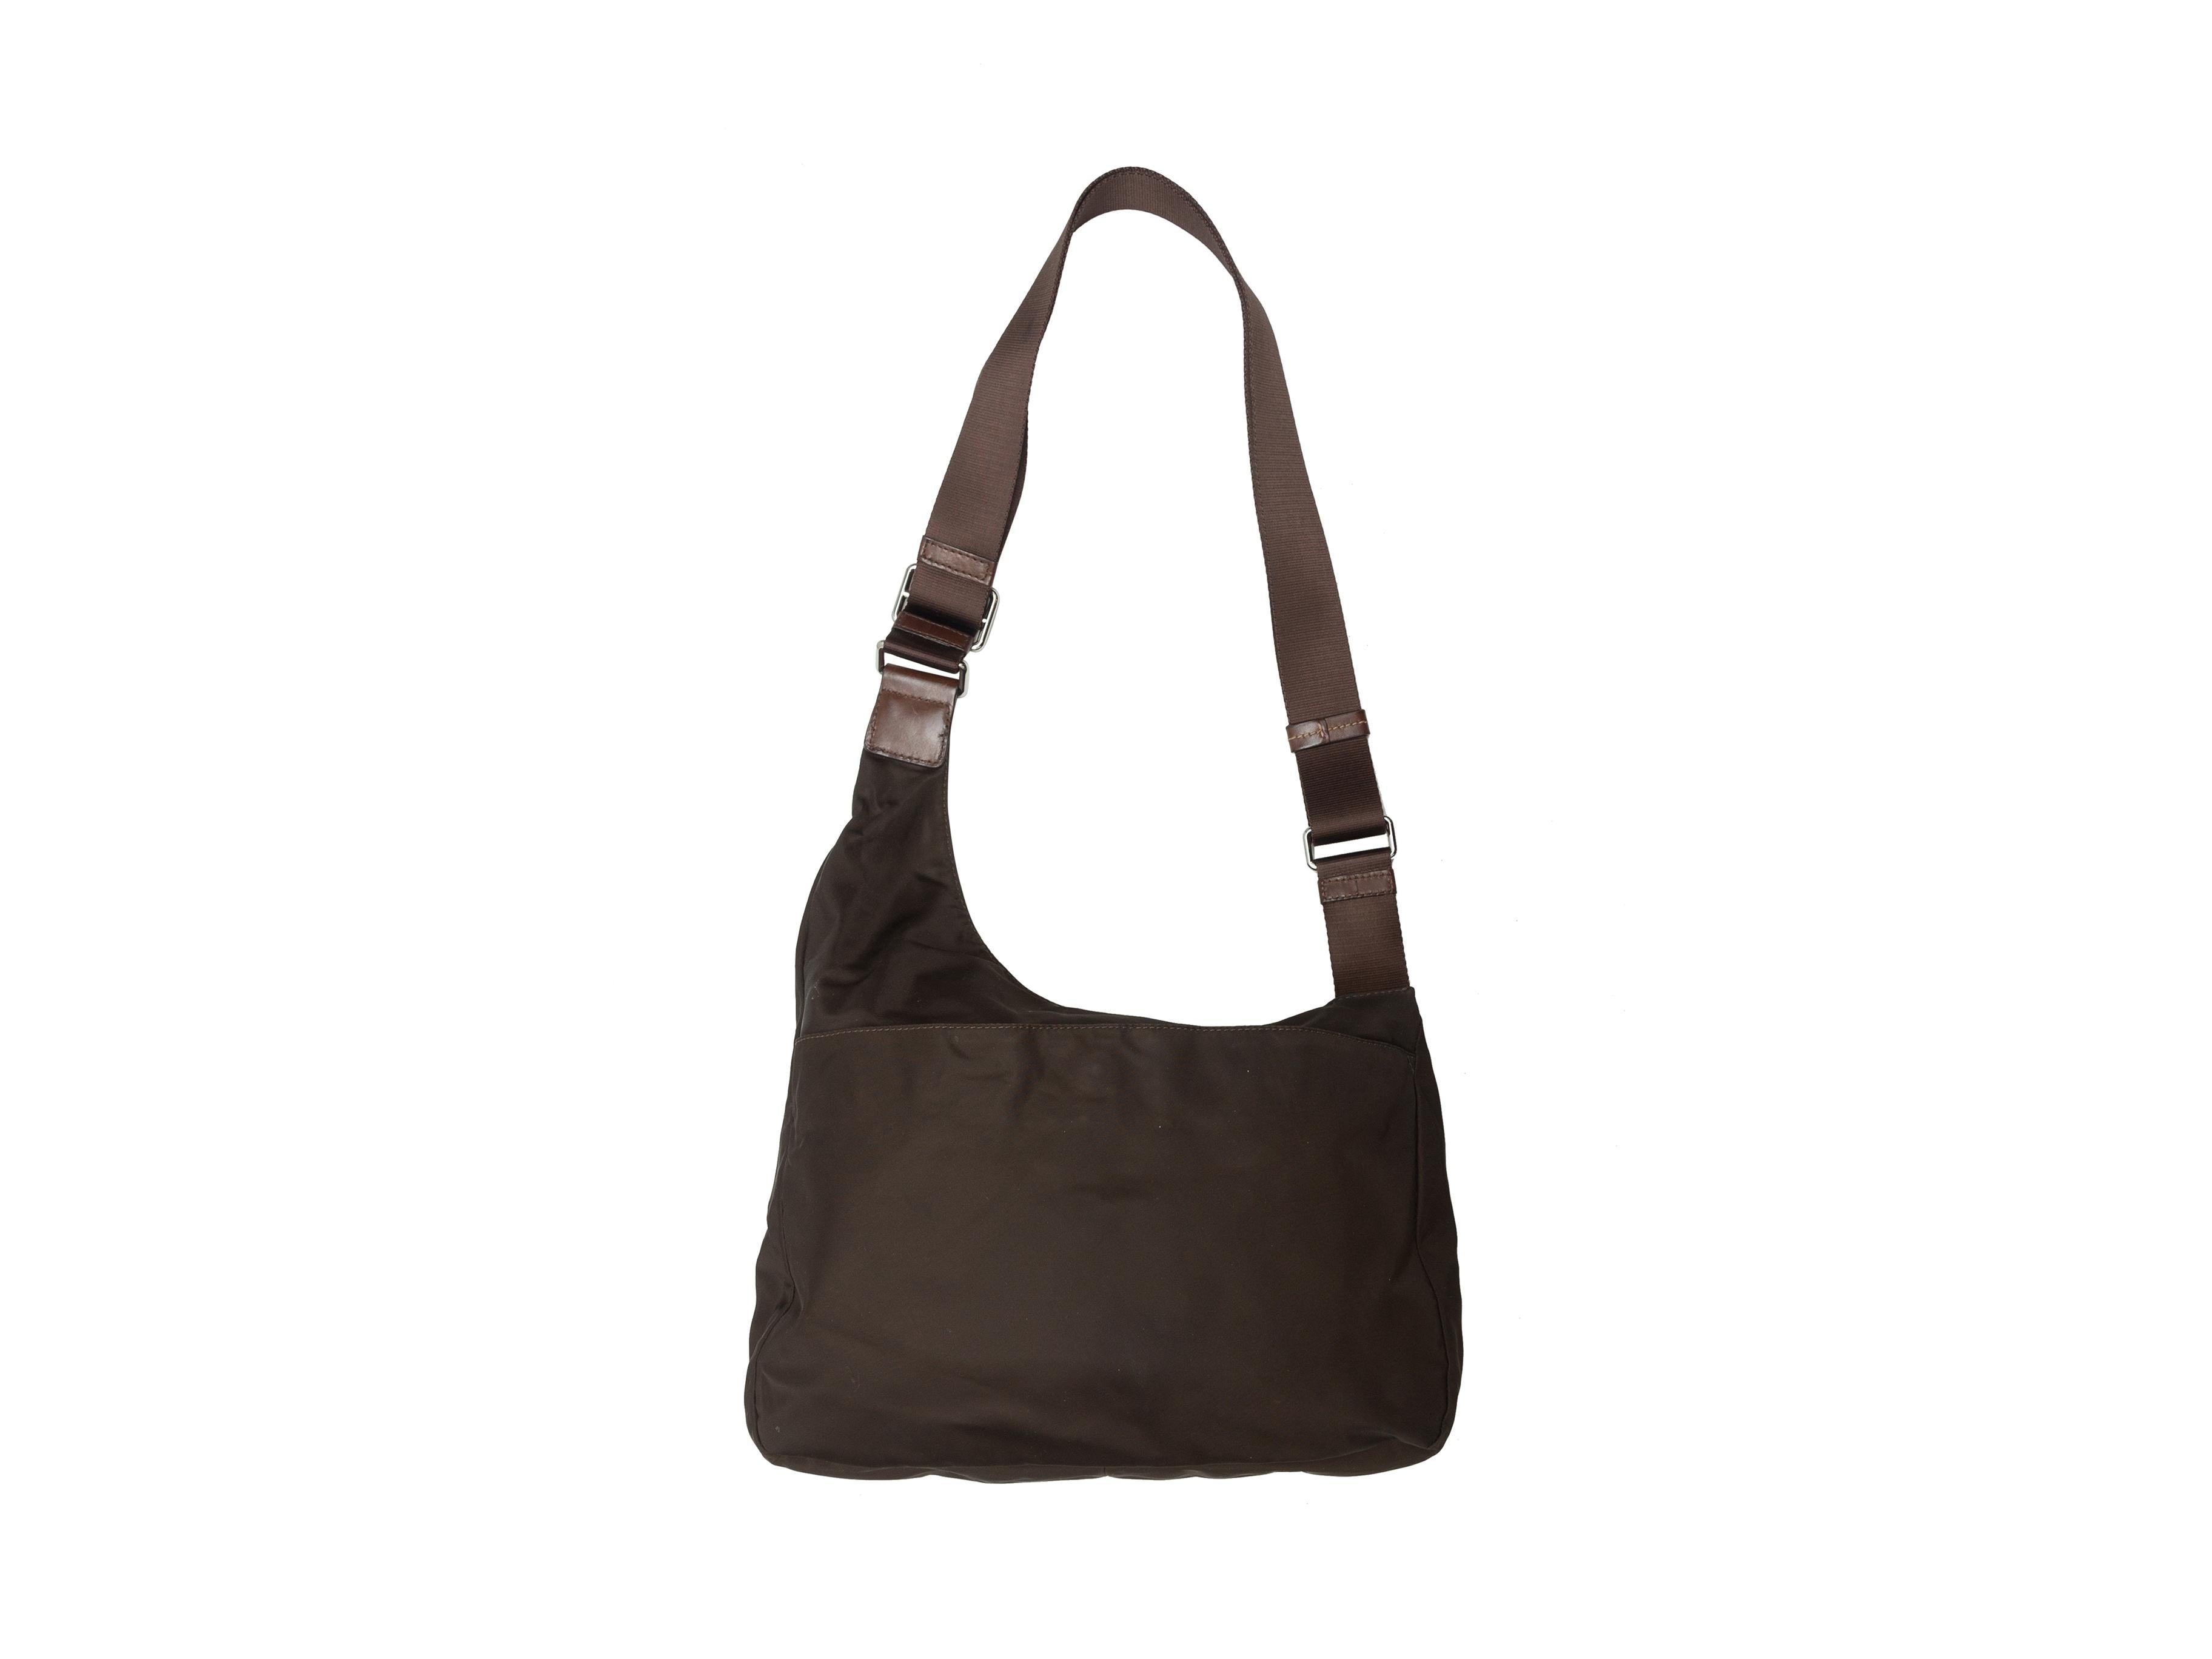 Product details: Brown nylon shoulder bag by Tumi. Silver-tone hardware. Leather trim throughout. Flap and zip pockets at exterior front. 13